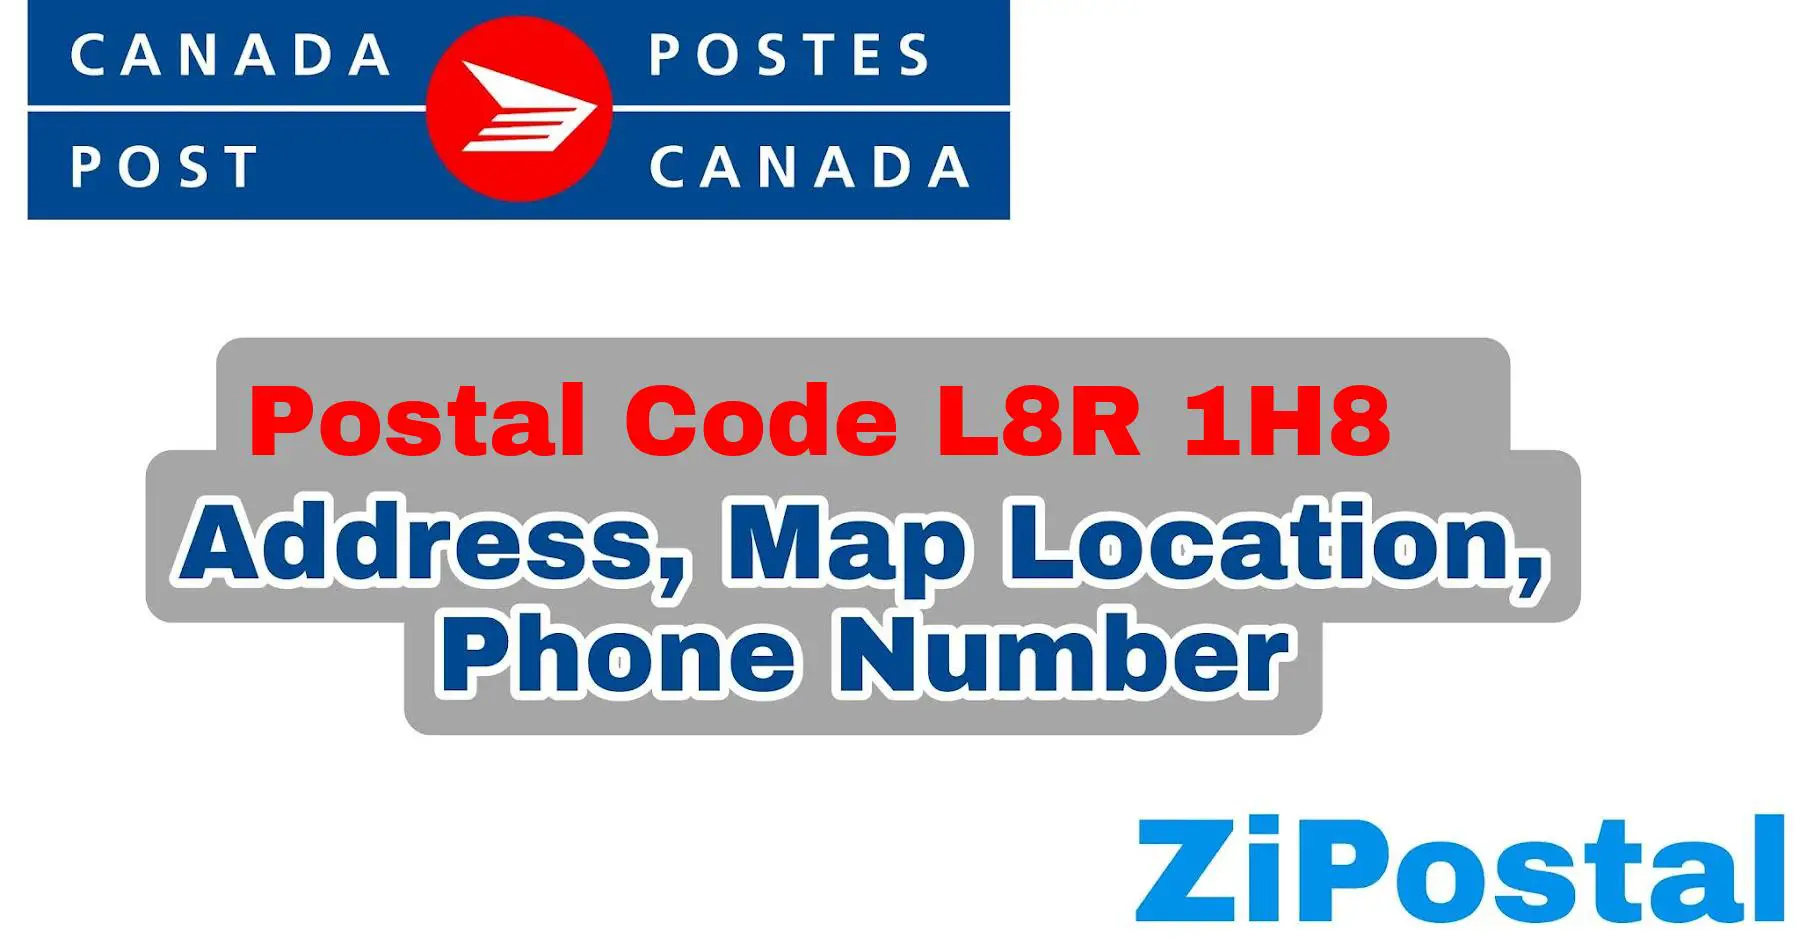 Postal Code L8R 1H8 Address Map Location and Phone Number